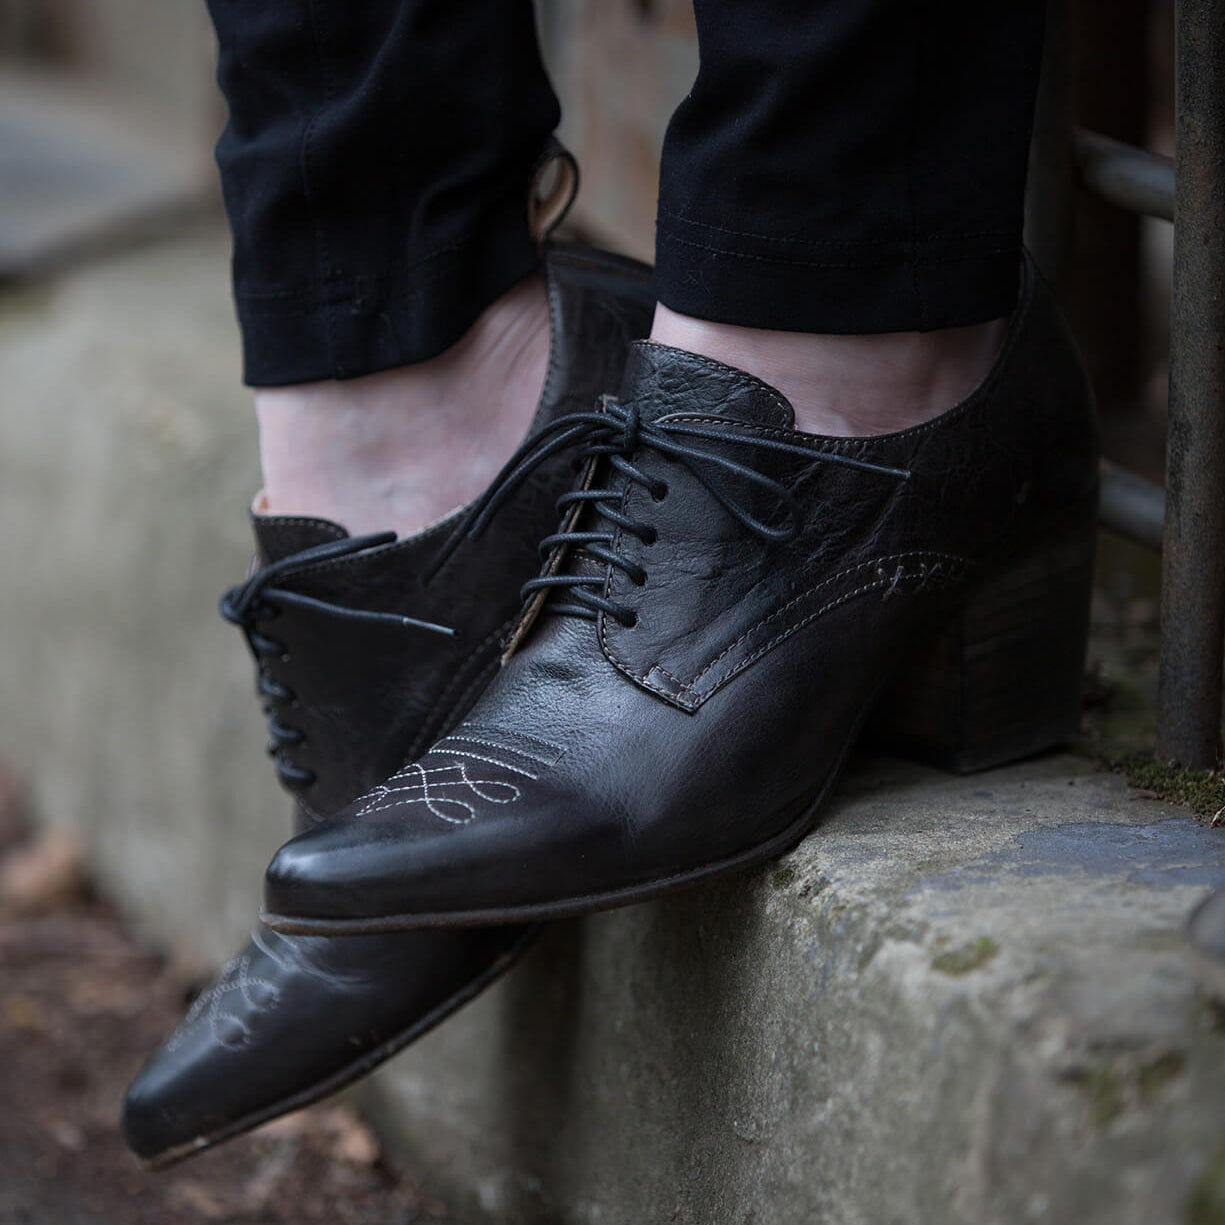 A person wearing Oak Tree Farms Braunstone dress shoes standing on a ledge.